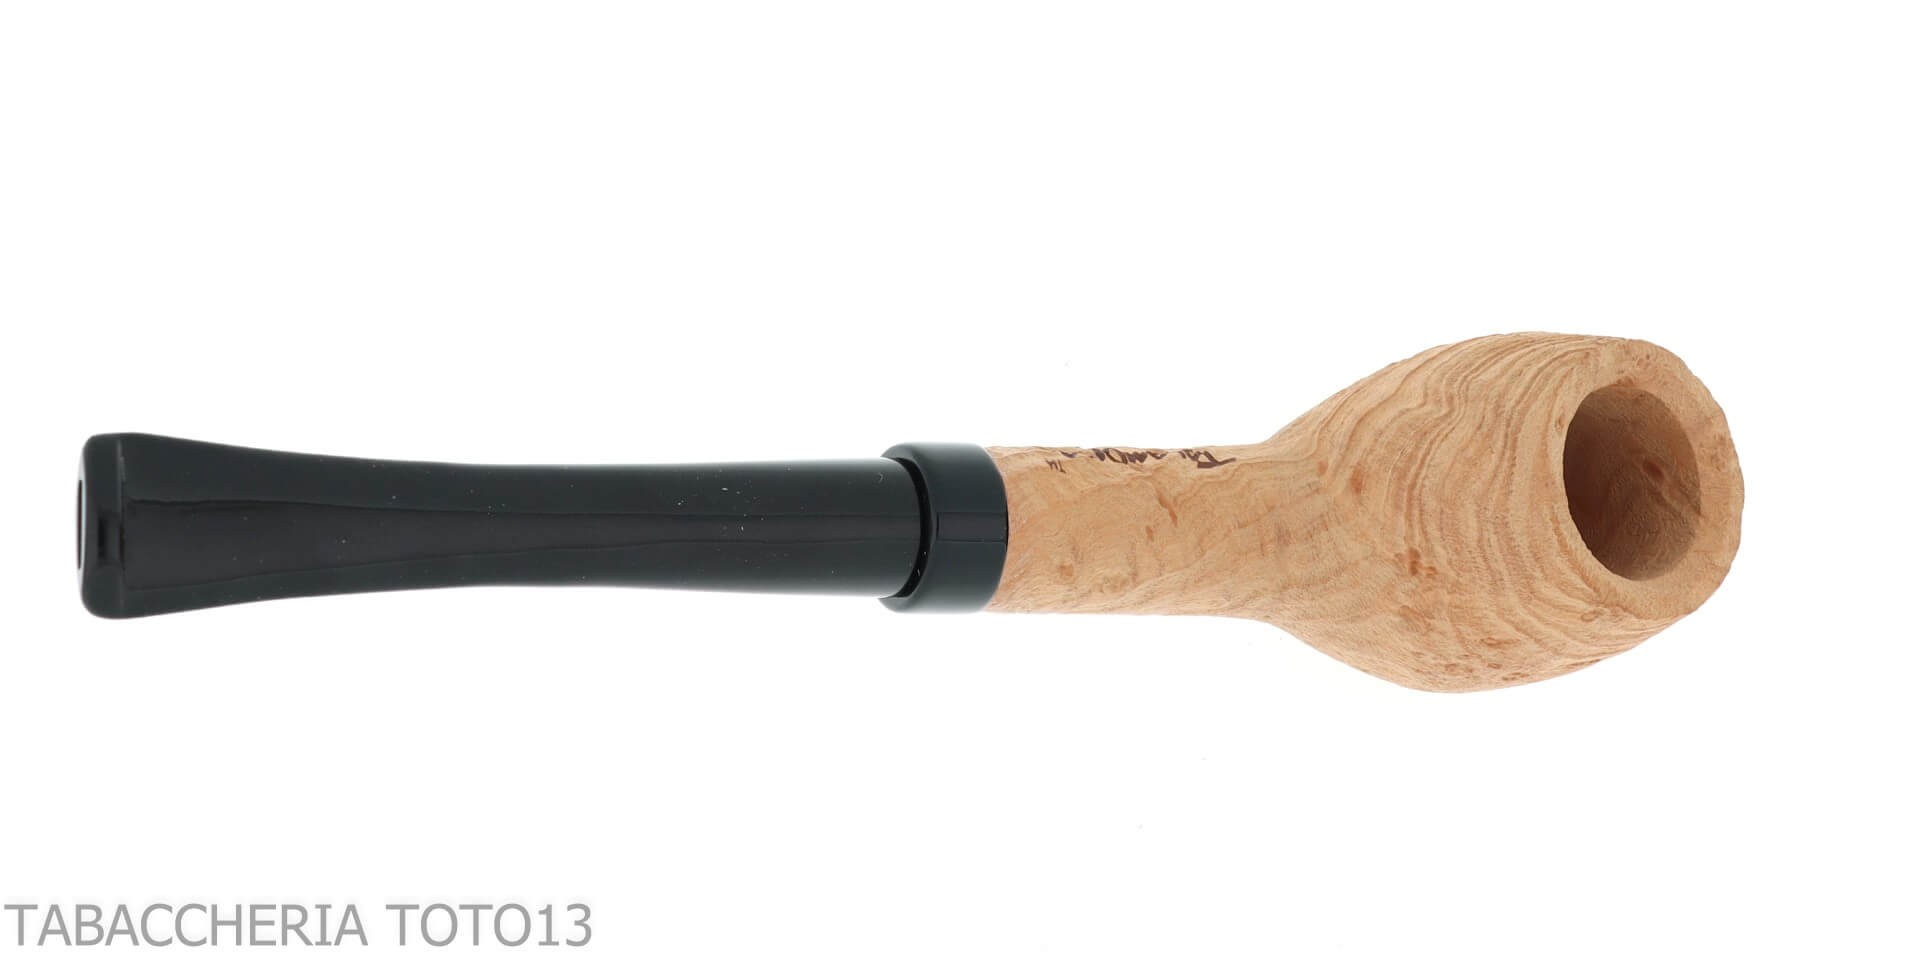 Pipe Arbutus in strawberry tree cutty shape natural sandblasted briar